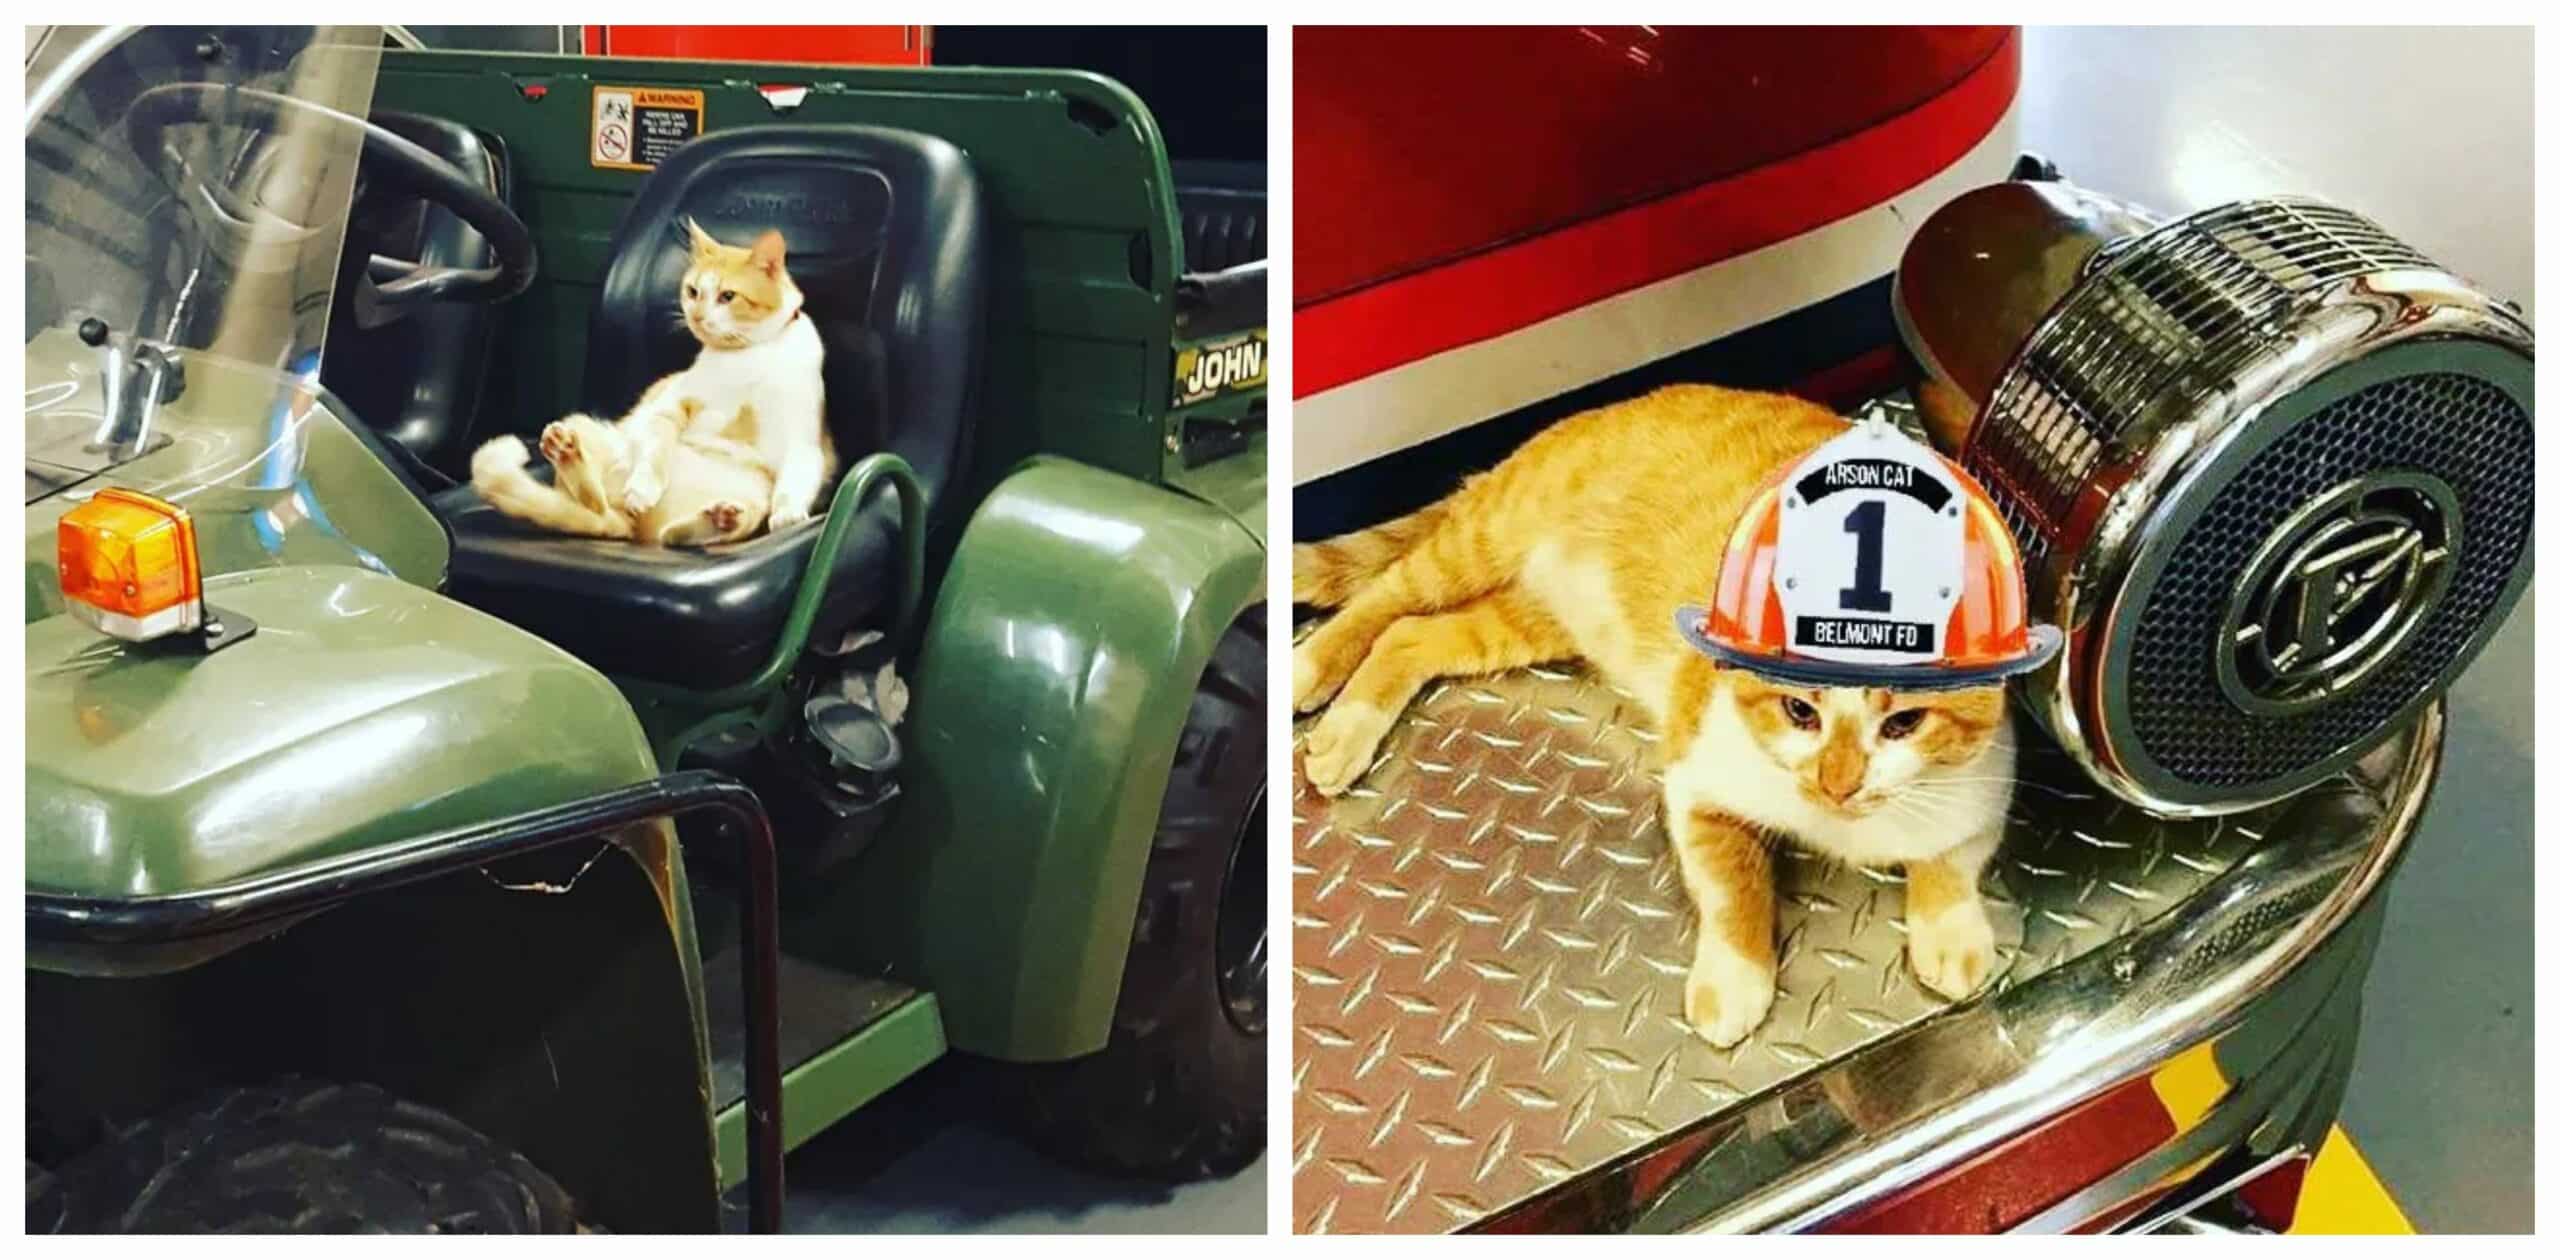 A stray cat enters a fire station and decides to make it his permanent home